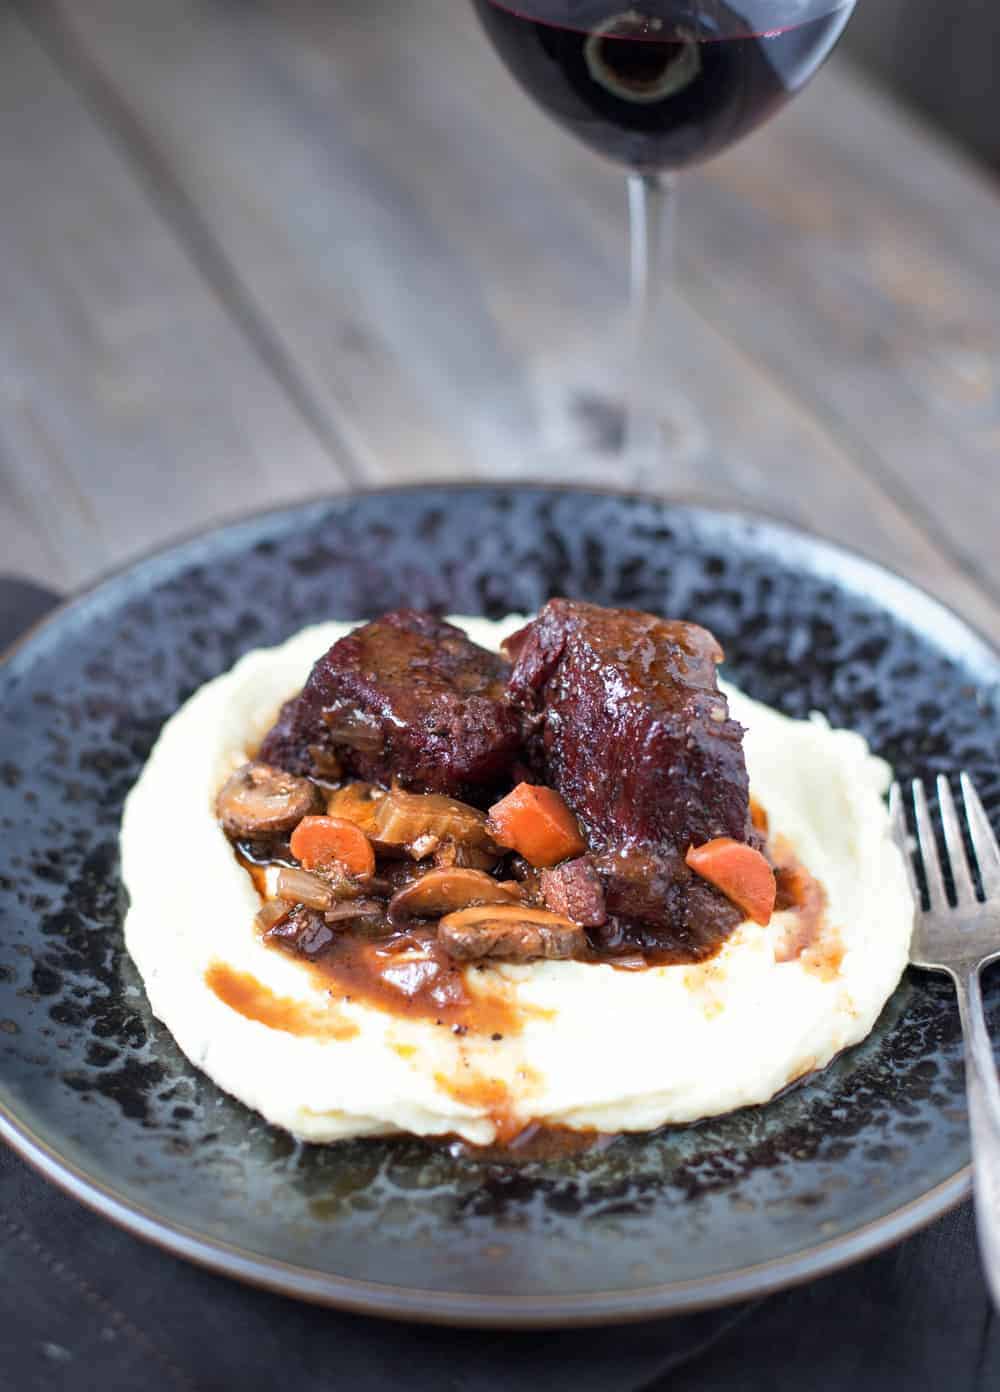 A plate of beef stew and a glass of wine